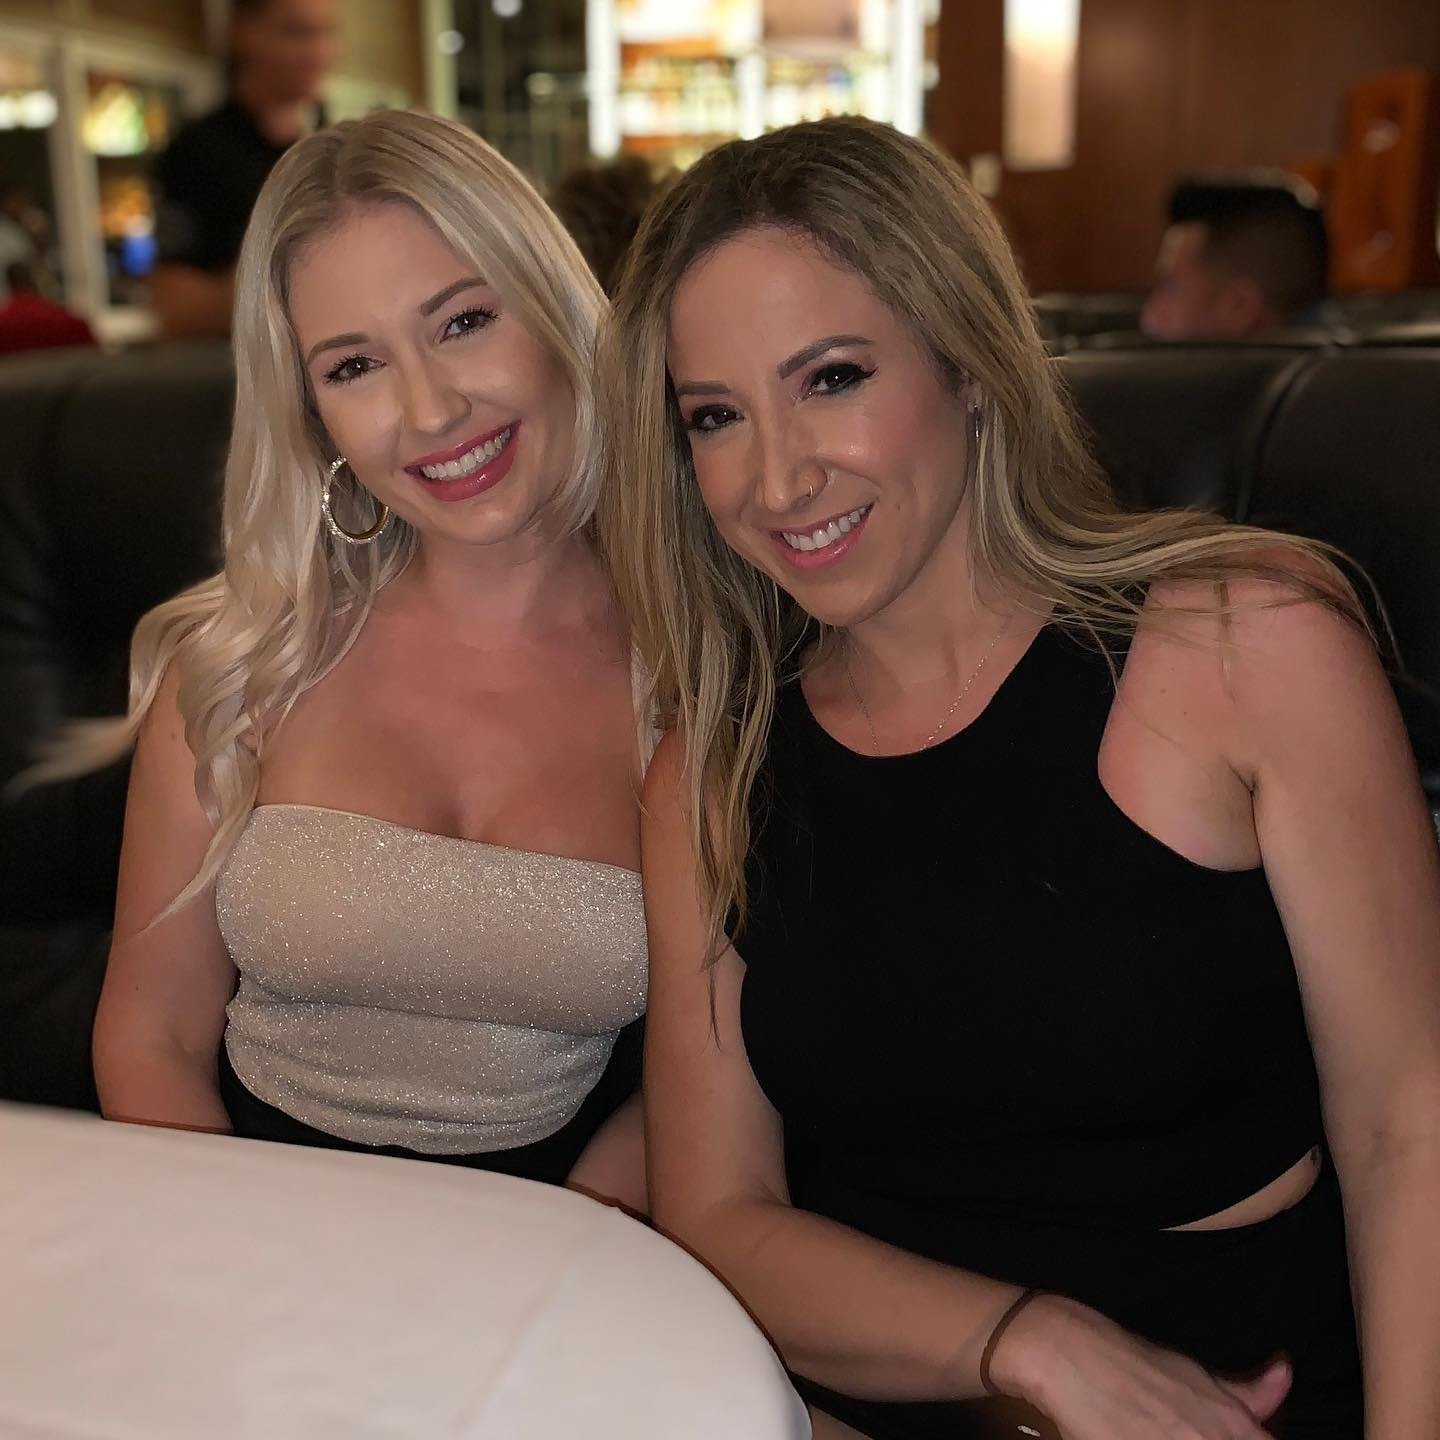 Lesbian Sisters Onlyfans - Porn Videos and Photos